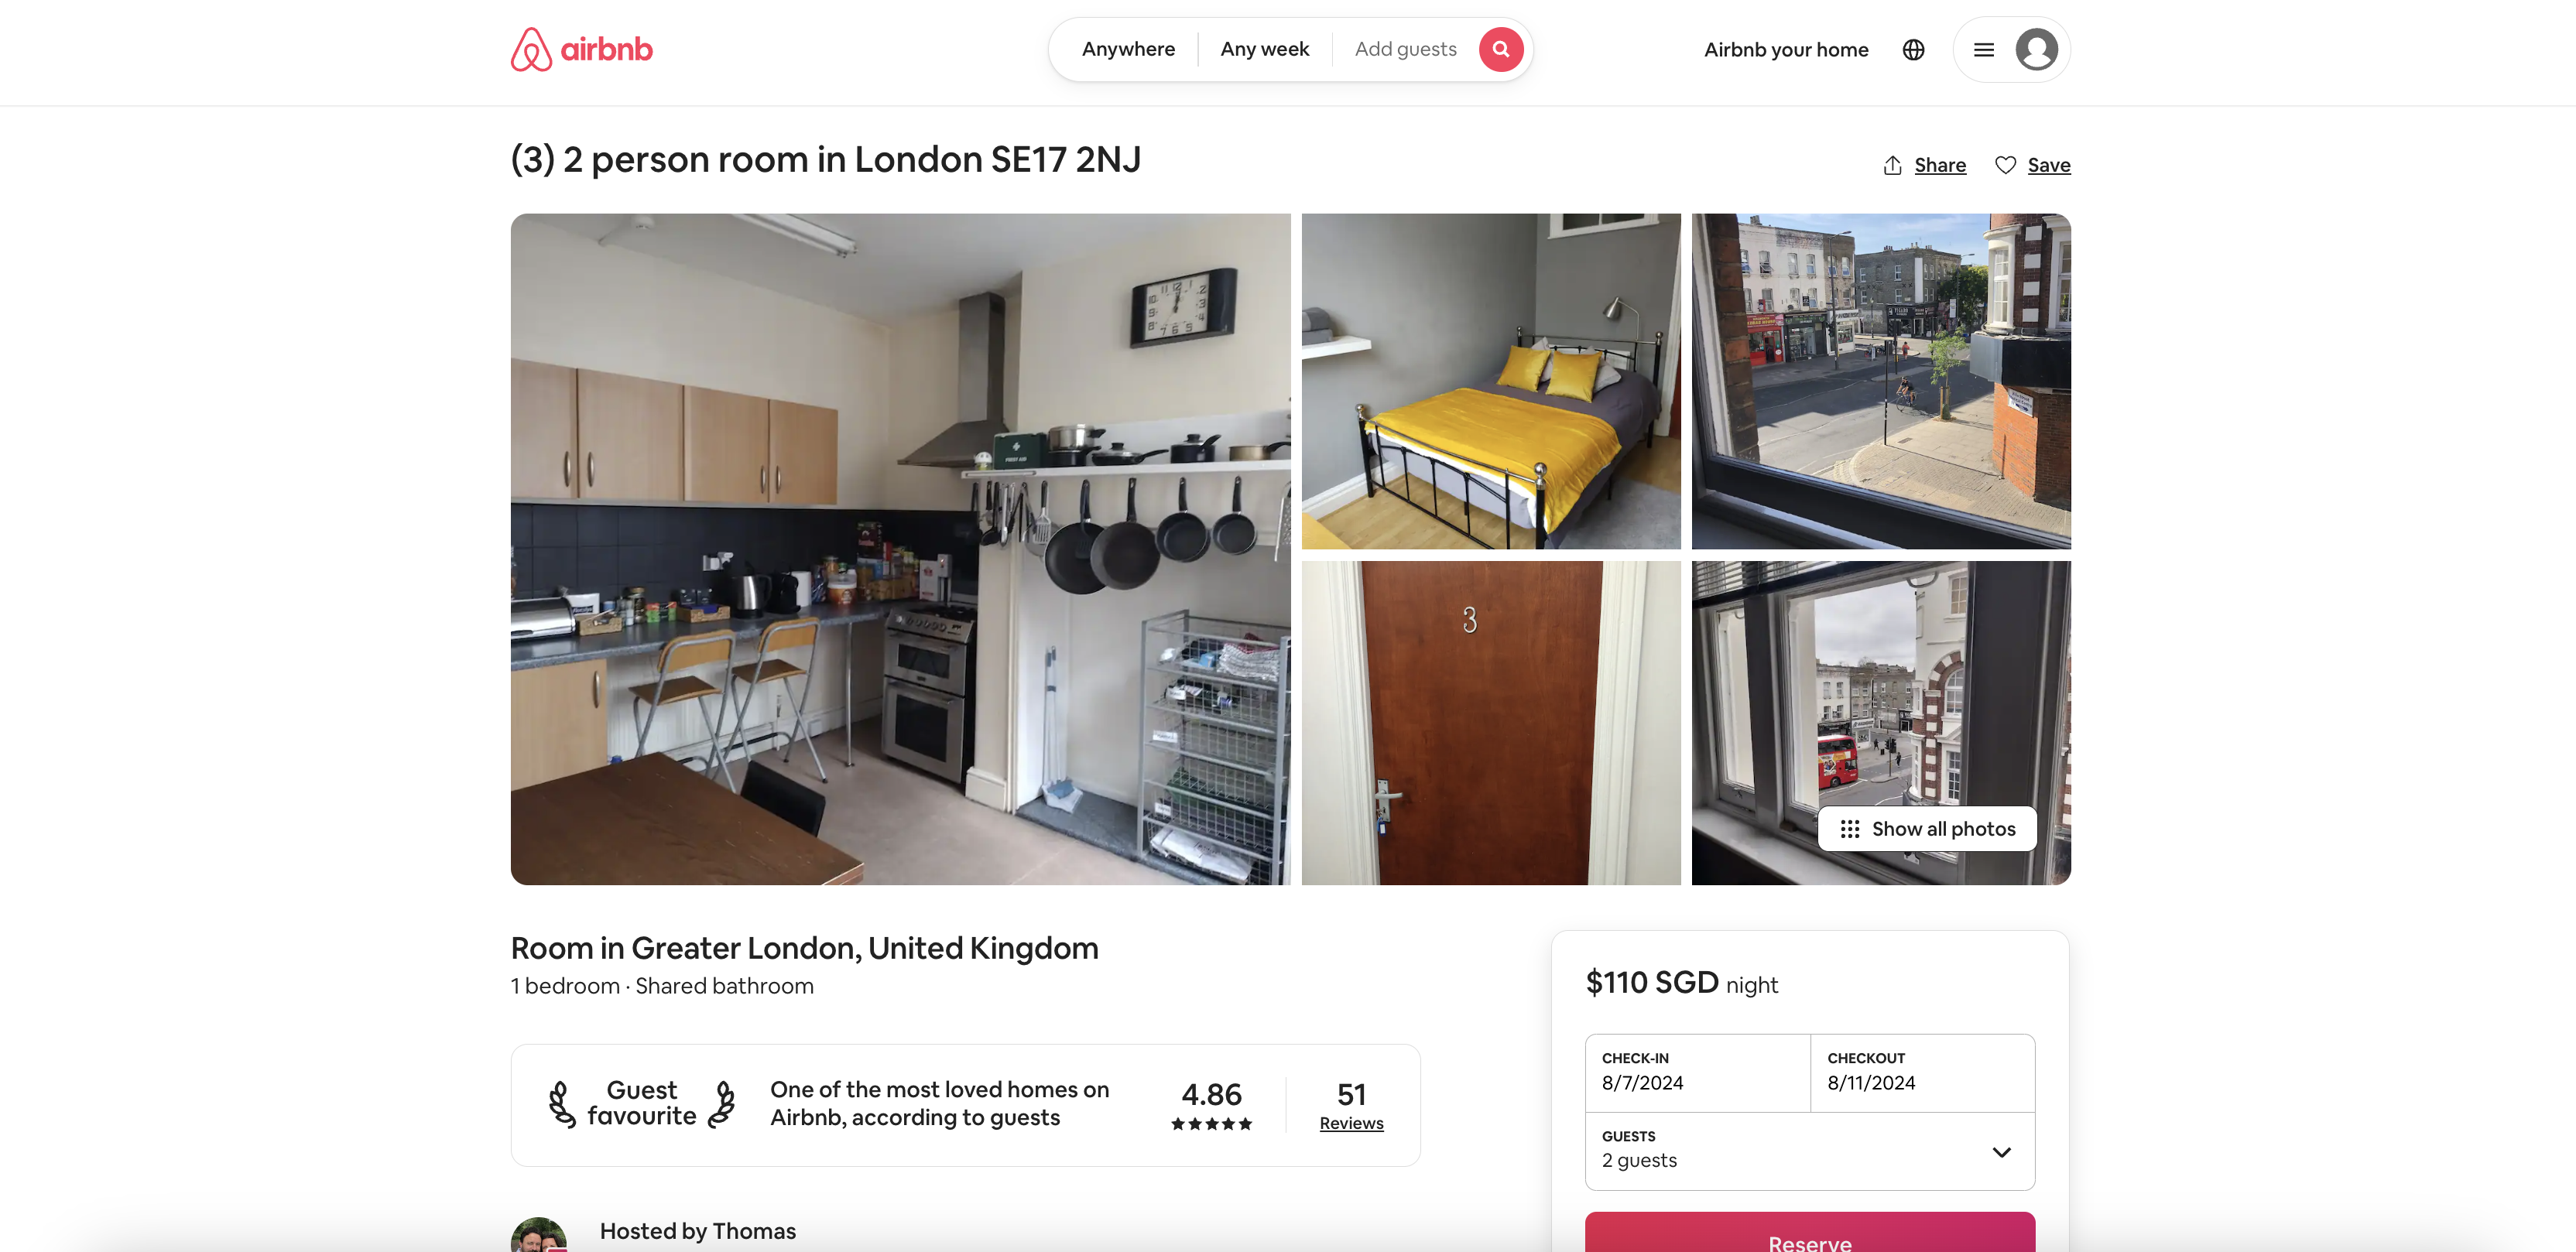 2 person room in London